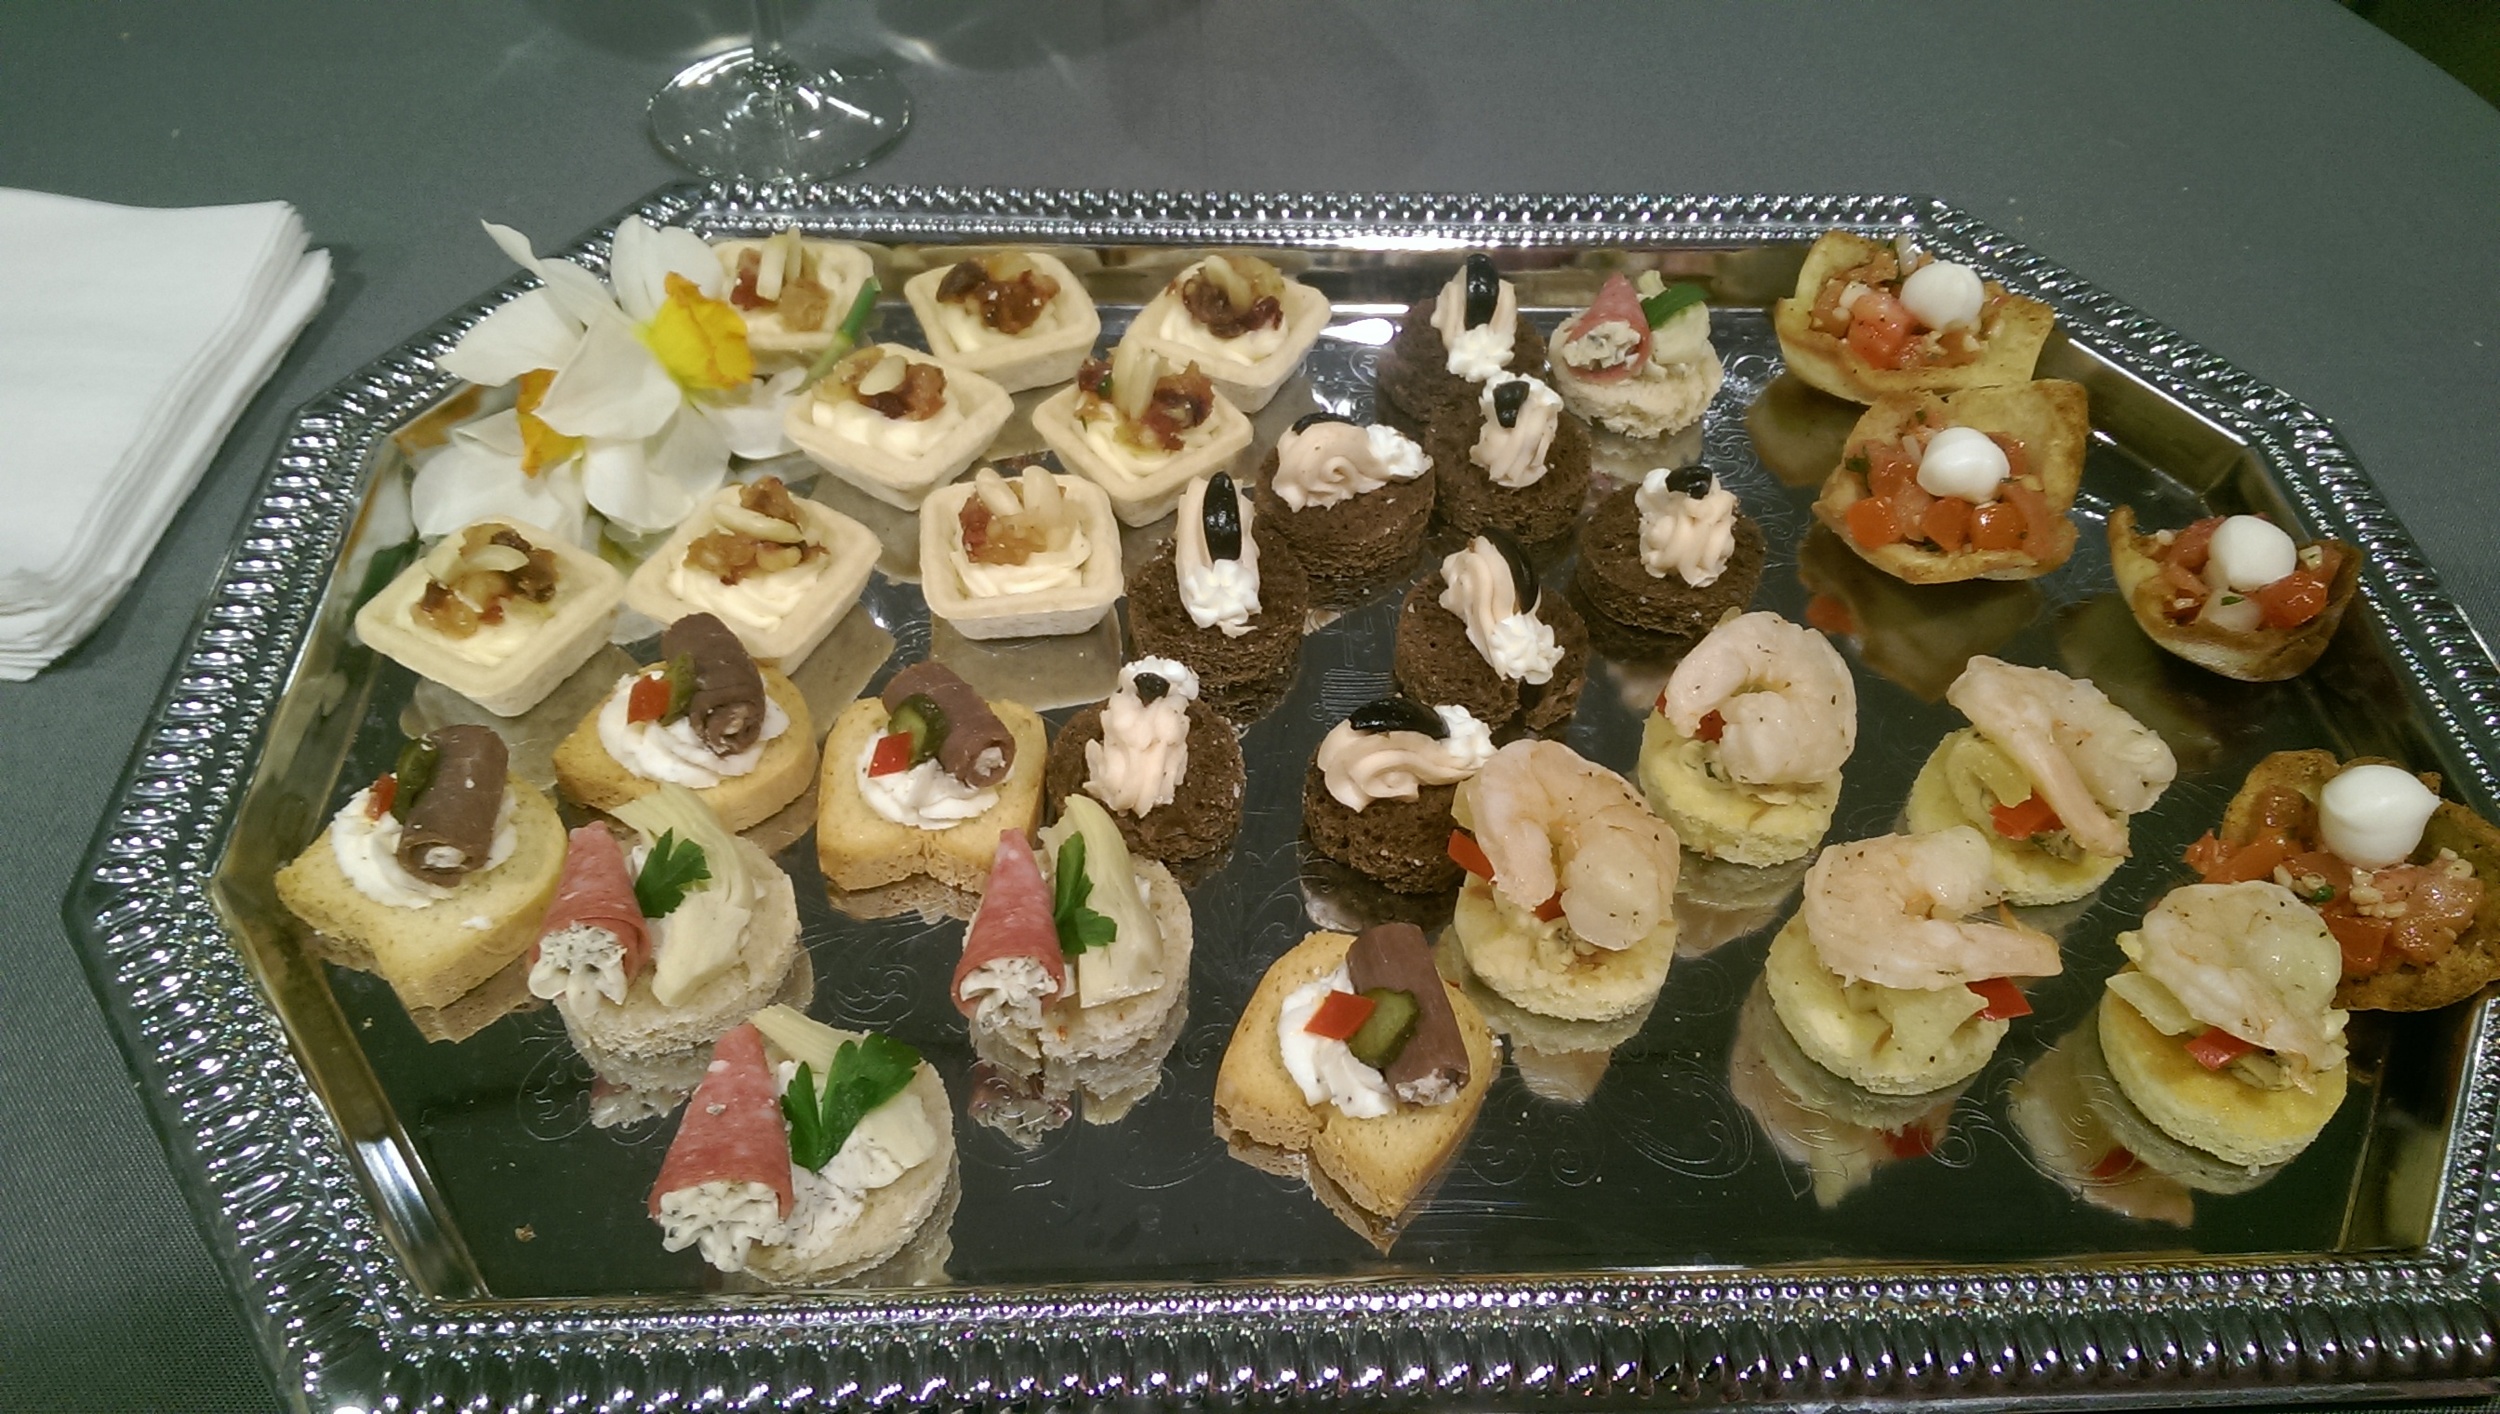   Various Passed Appetizers. Pictured is, Roast Beef Roulades, Salami Cornets, Grilled Shrimp on Jalapeno Coconut Cornbread, Salmon Mousse on Pumpernickel, Bruschetta in Pita Cups, and Baked Brie and Fruit Cups&nbsp;  